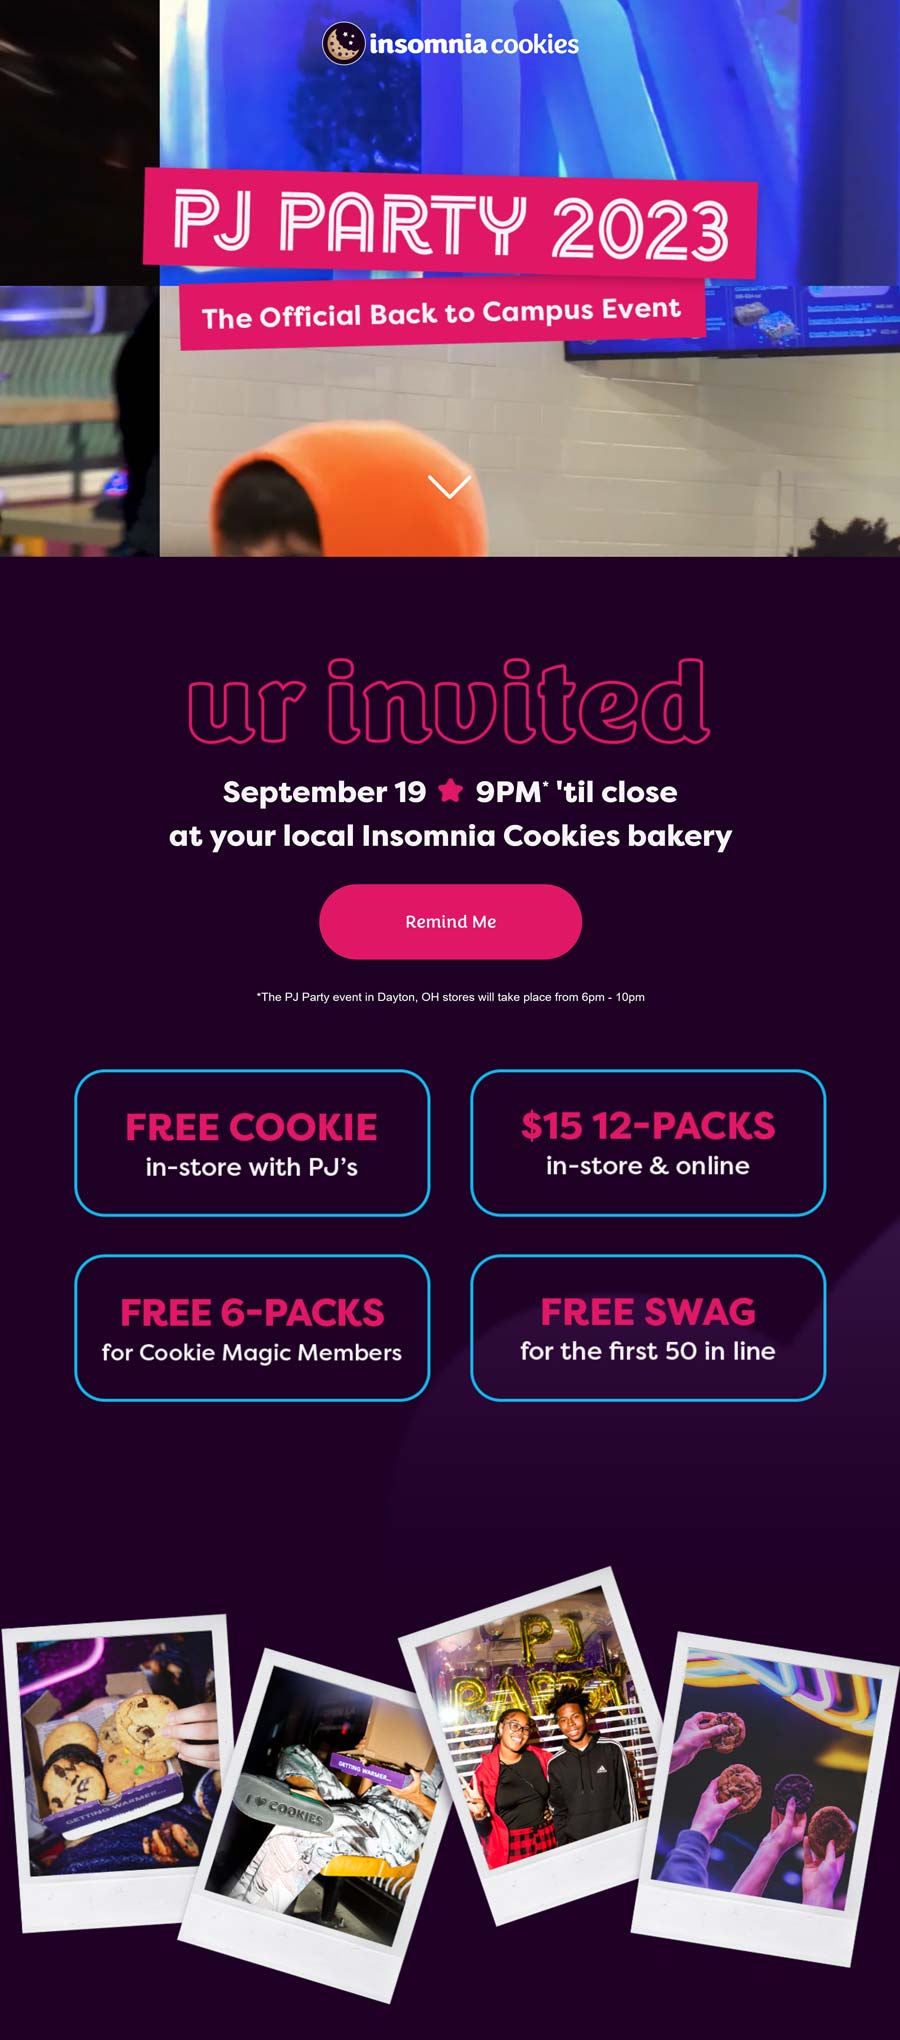 Insomnia Cookies restaurants Coupon  Free cookie this evening in pajamas at Insomnia Cookies #insomniacookies 